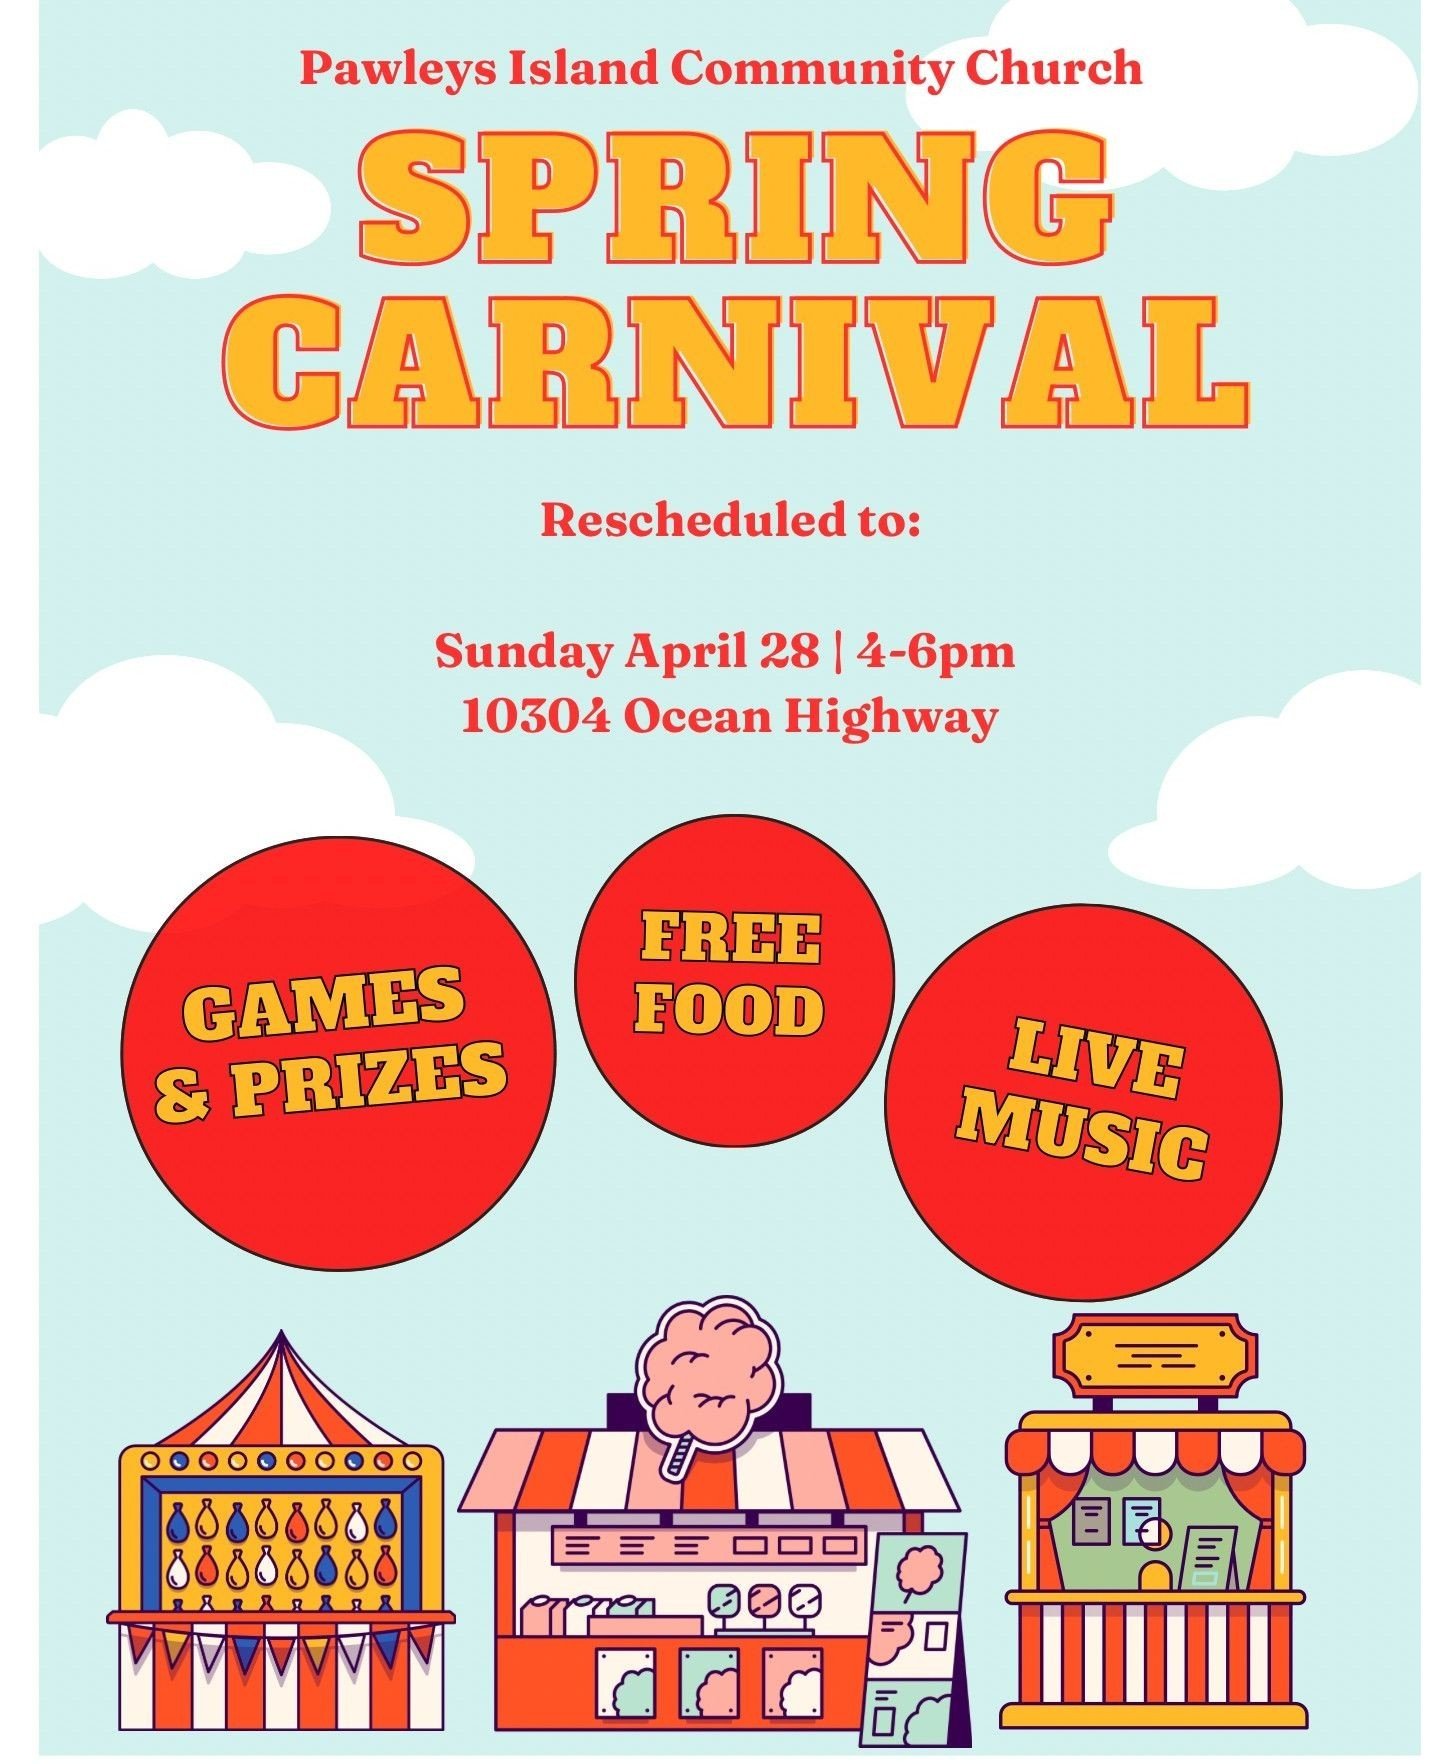 THIS SUNDAY IS SPRING CARNIVAL! 4-6p for everyone to come and join in the community fun.